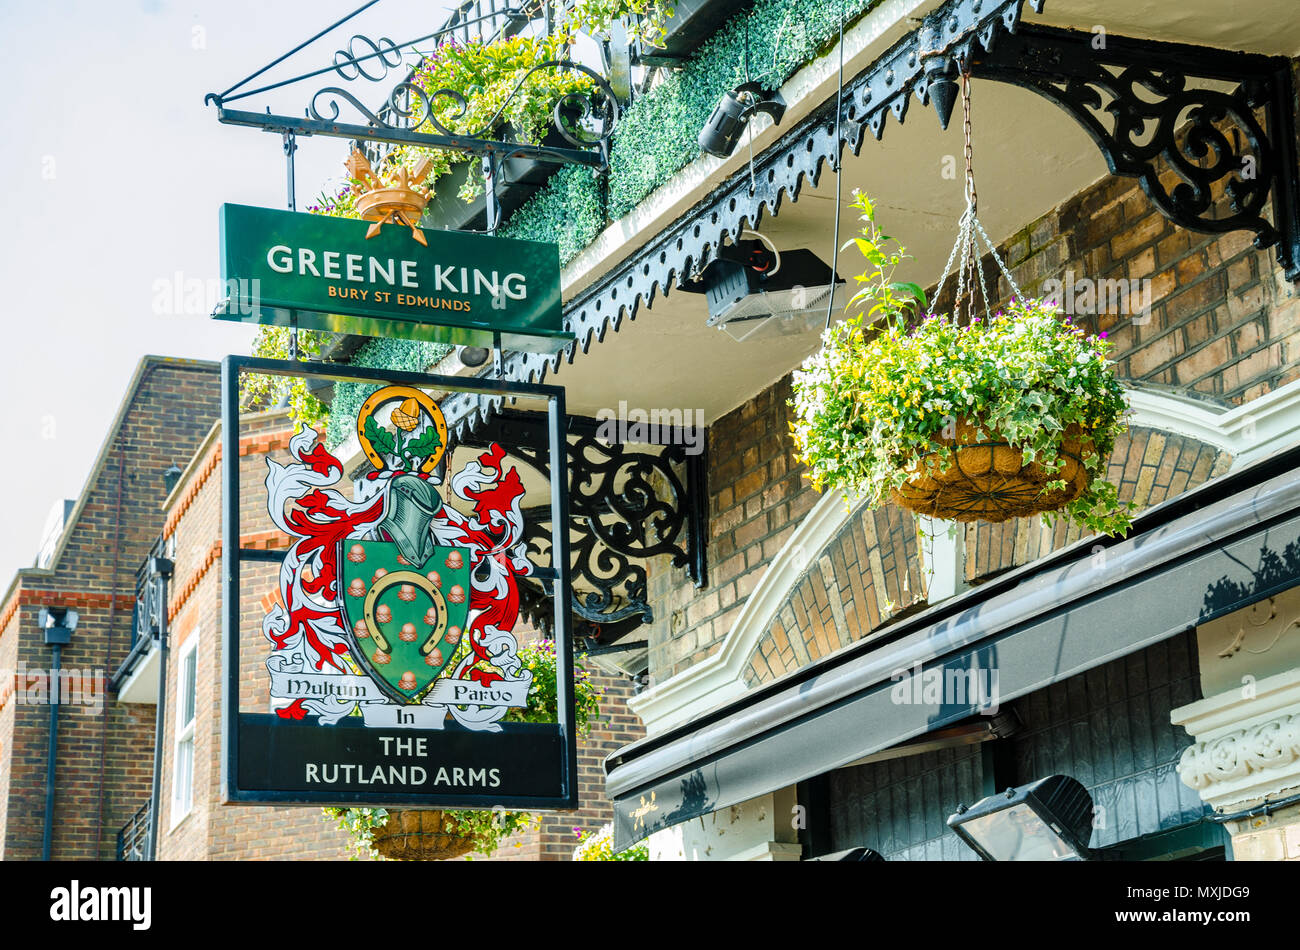 The Rutland Arms is a Greene king pub on the banks of The River Thames at Hammersmith in London, UK. Stock Photo